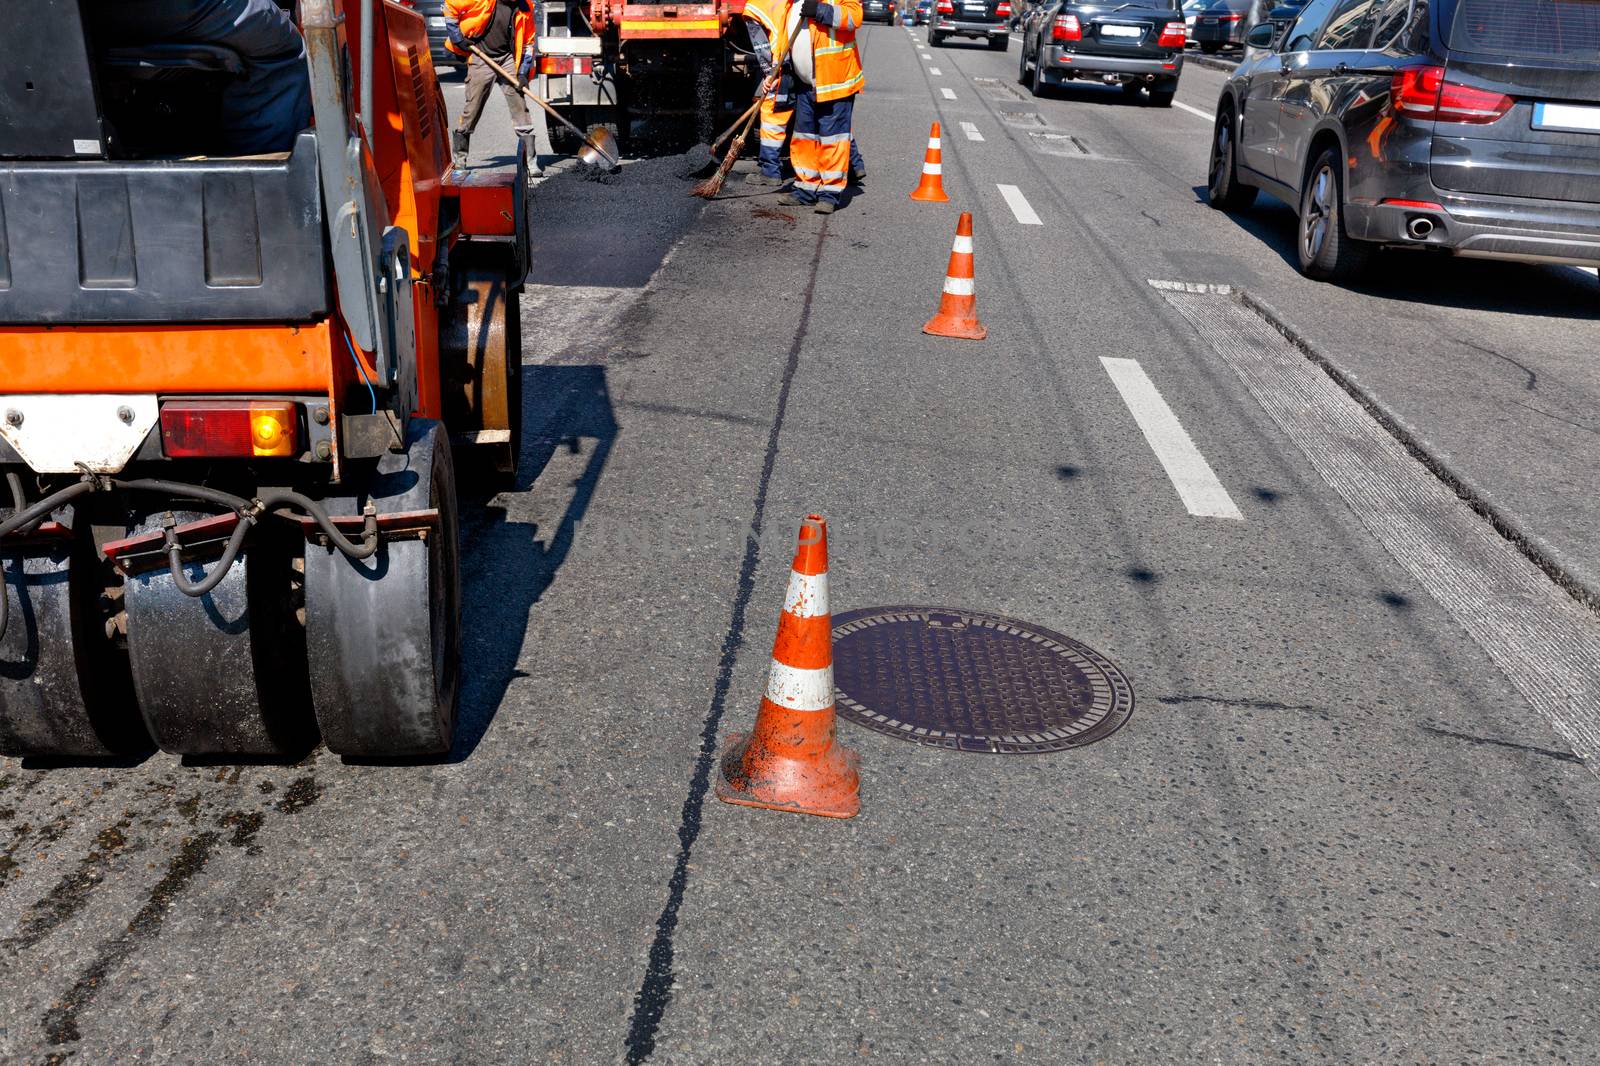 Working team patches the damaged part of the asphalt on the fenced cones stretch of city street, image with copy space.